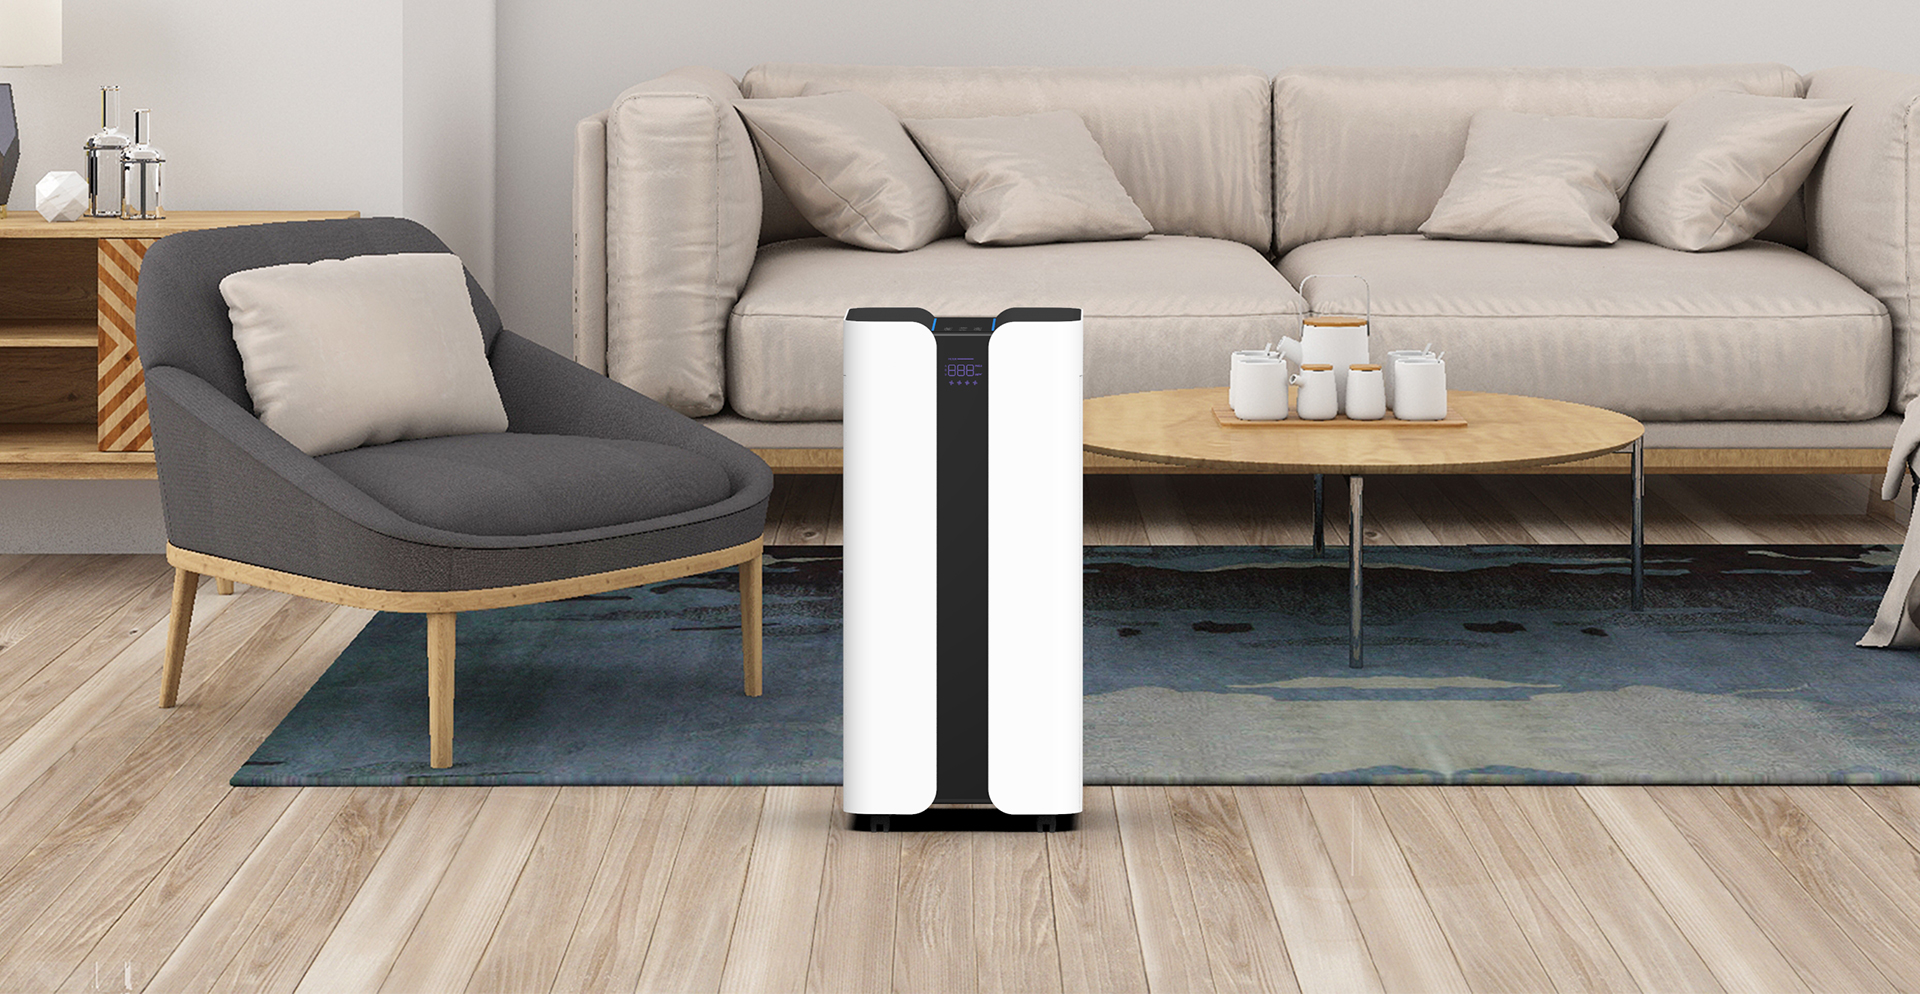 therapure air purifier manufacture